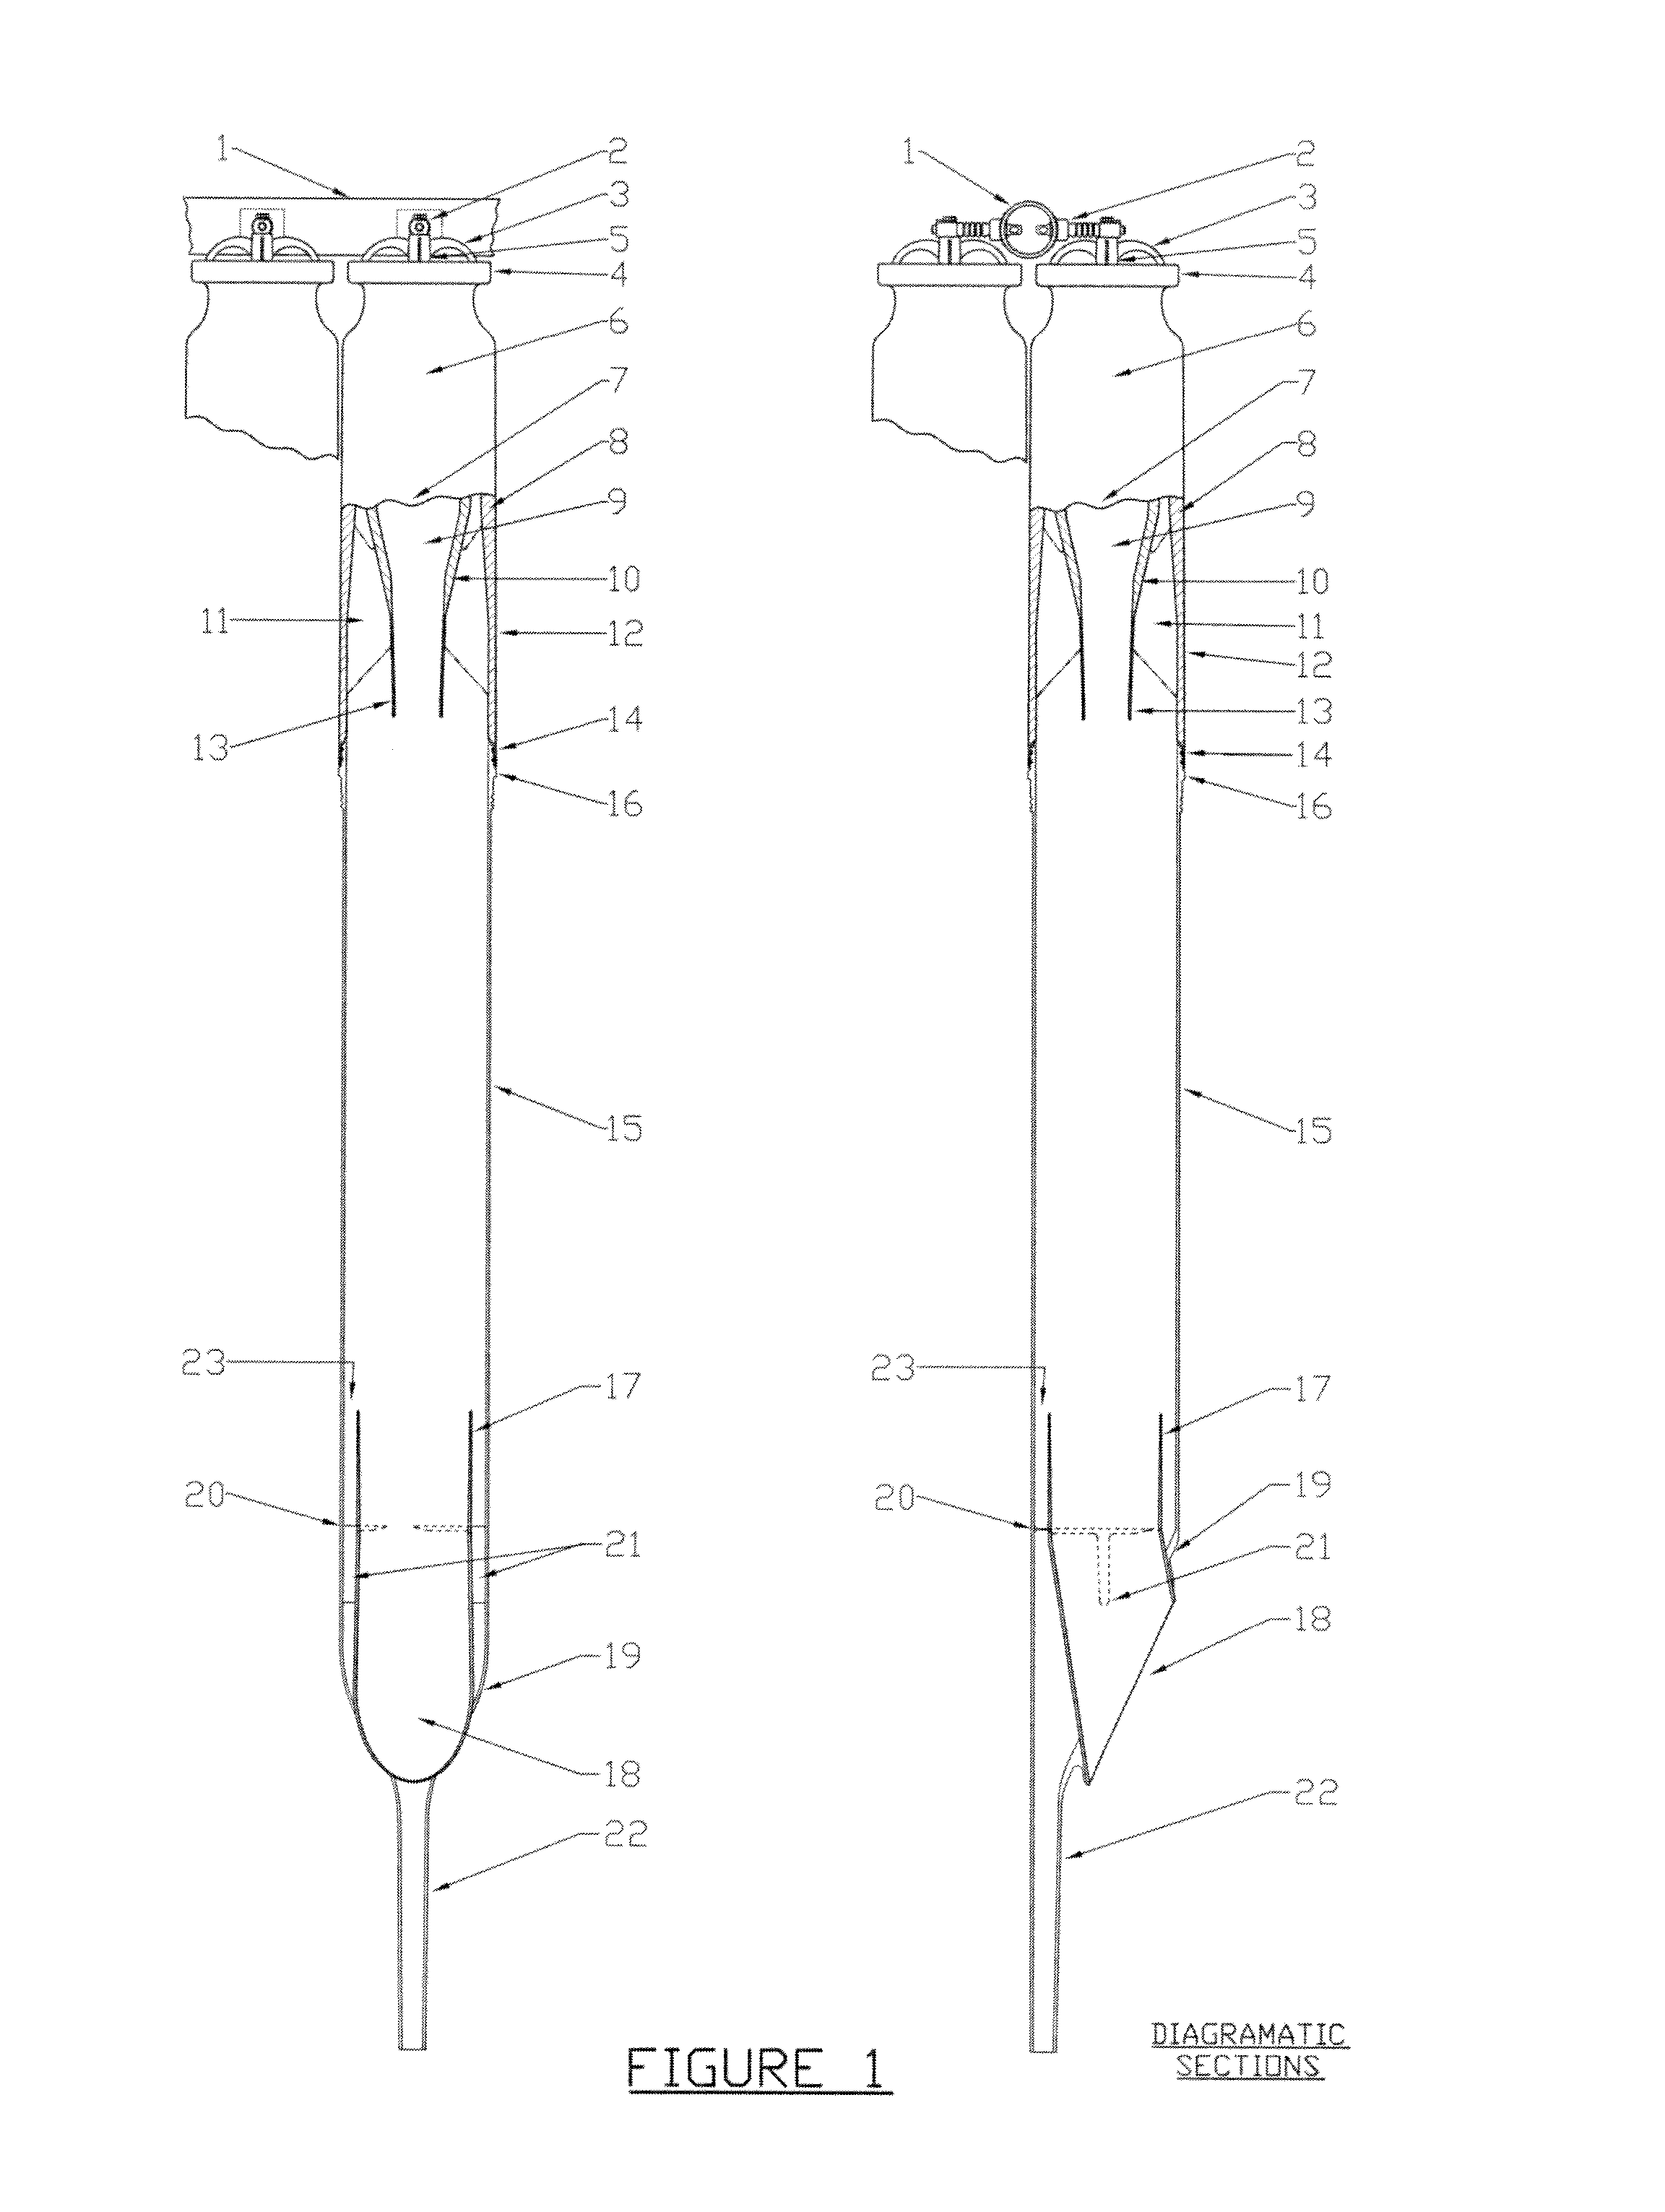 Apparatus for separation and processing of materials